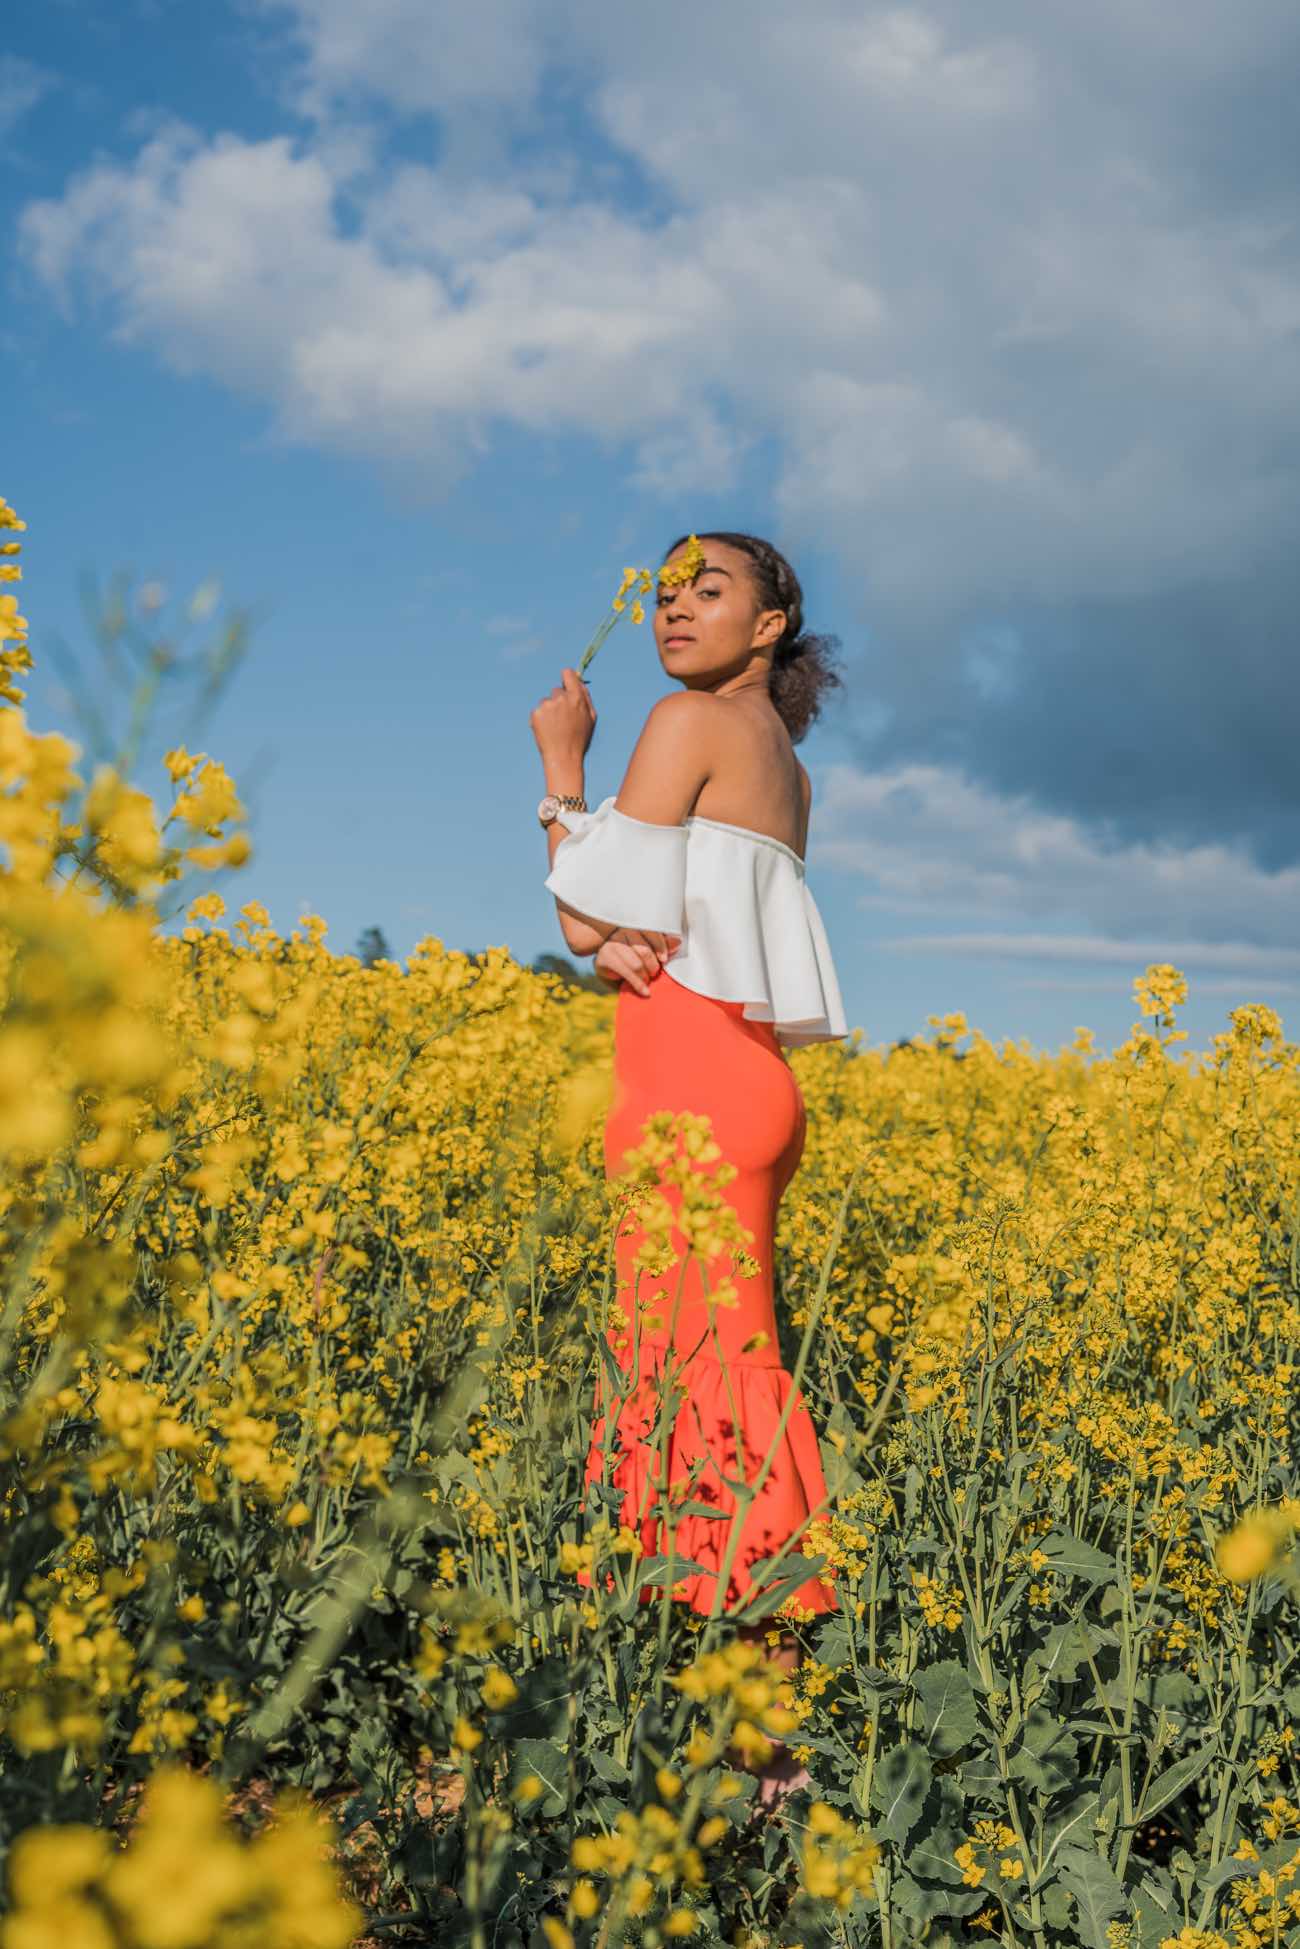 Girl smiling standing in a flower field in summer